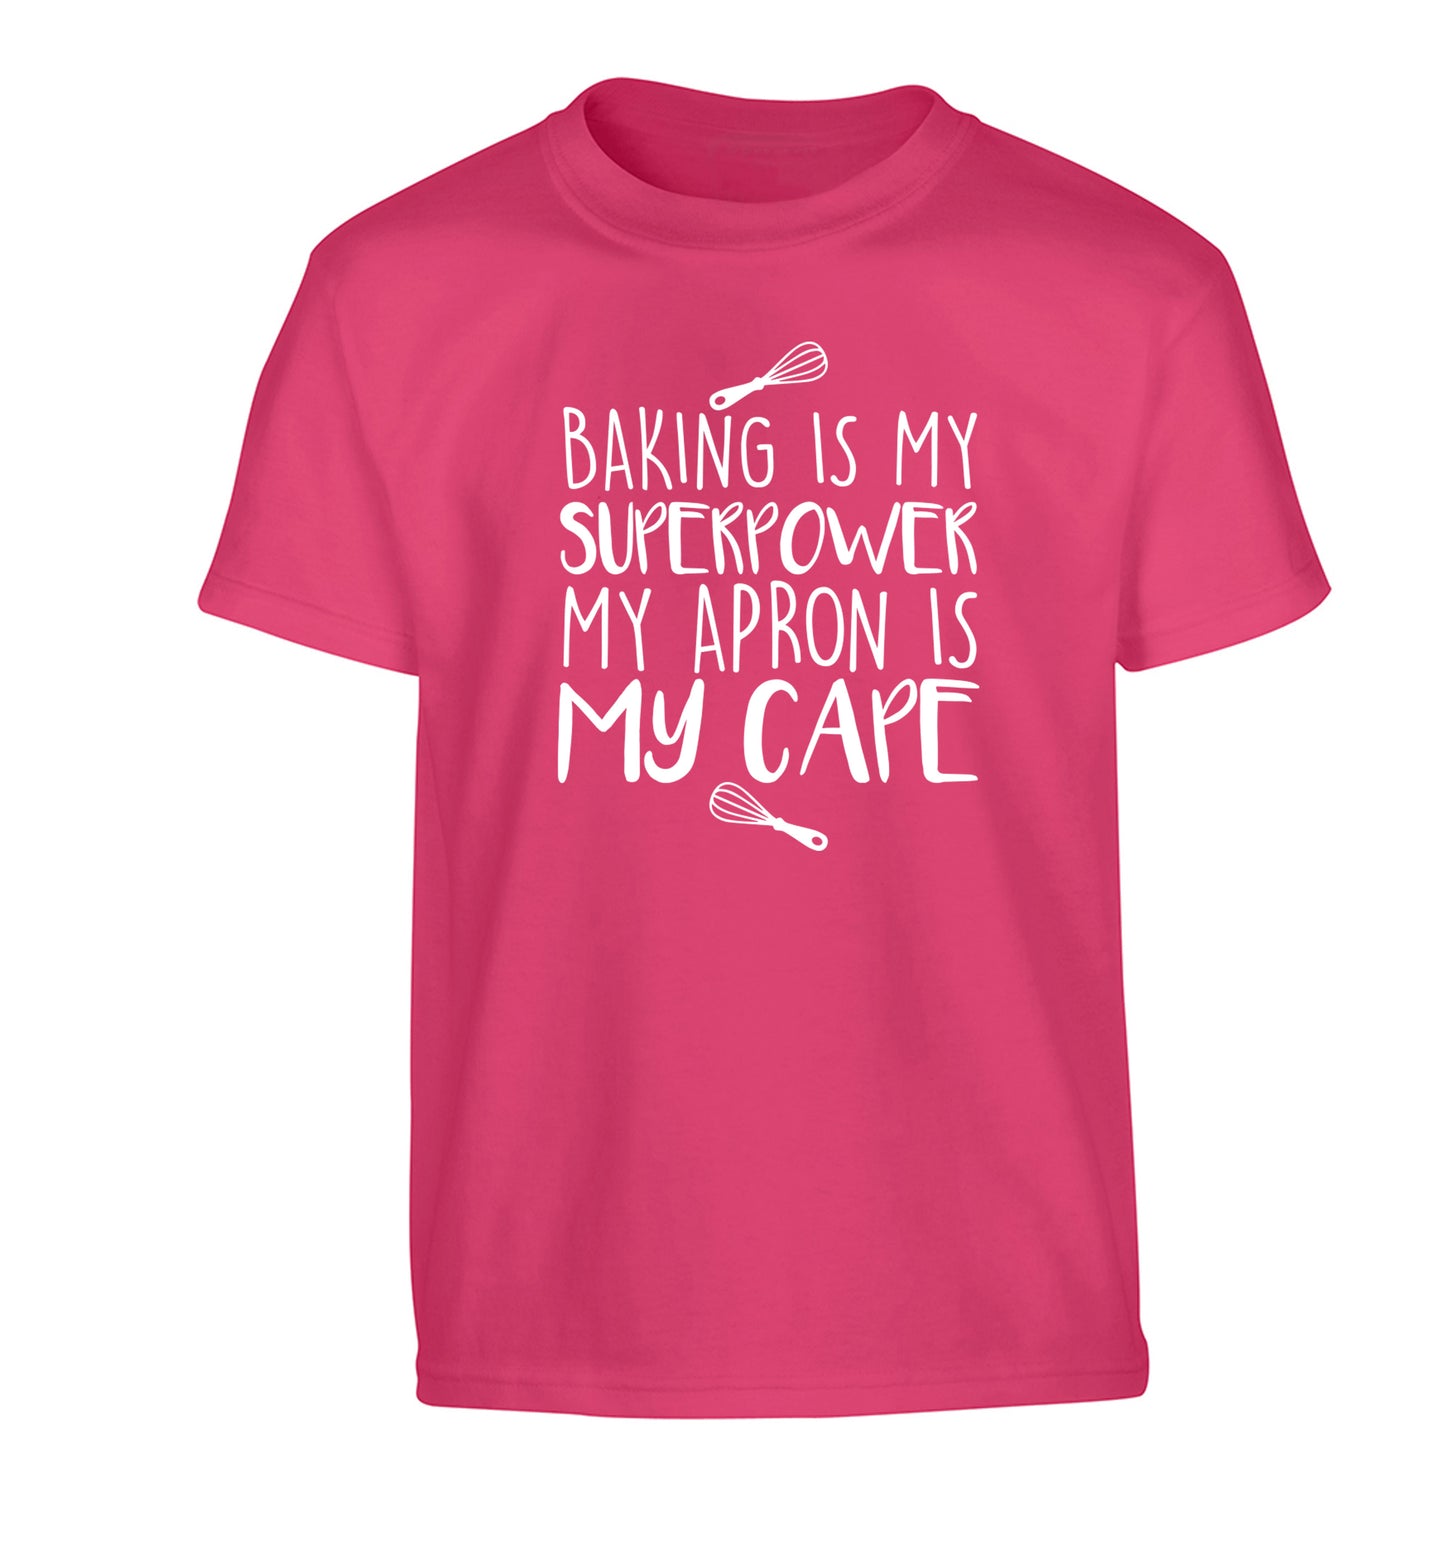 Baking is my superpower my apron is my cape Children's pink Tshirt 12-14 Years